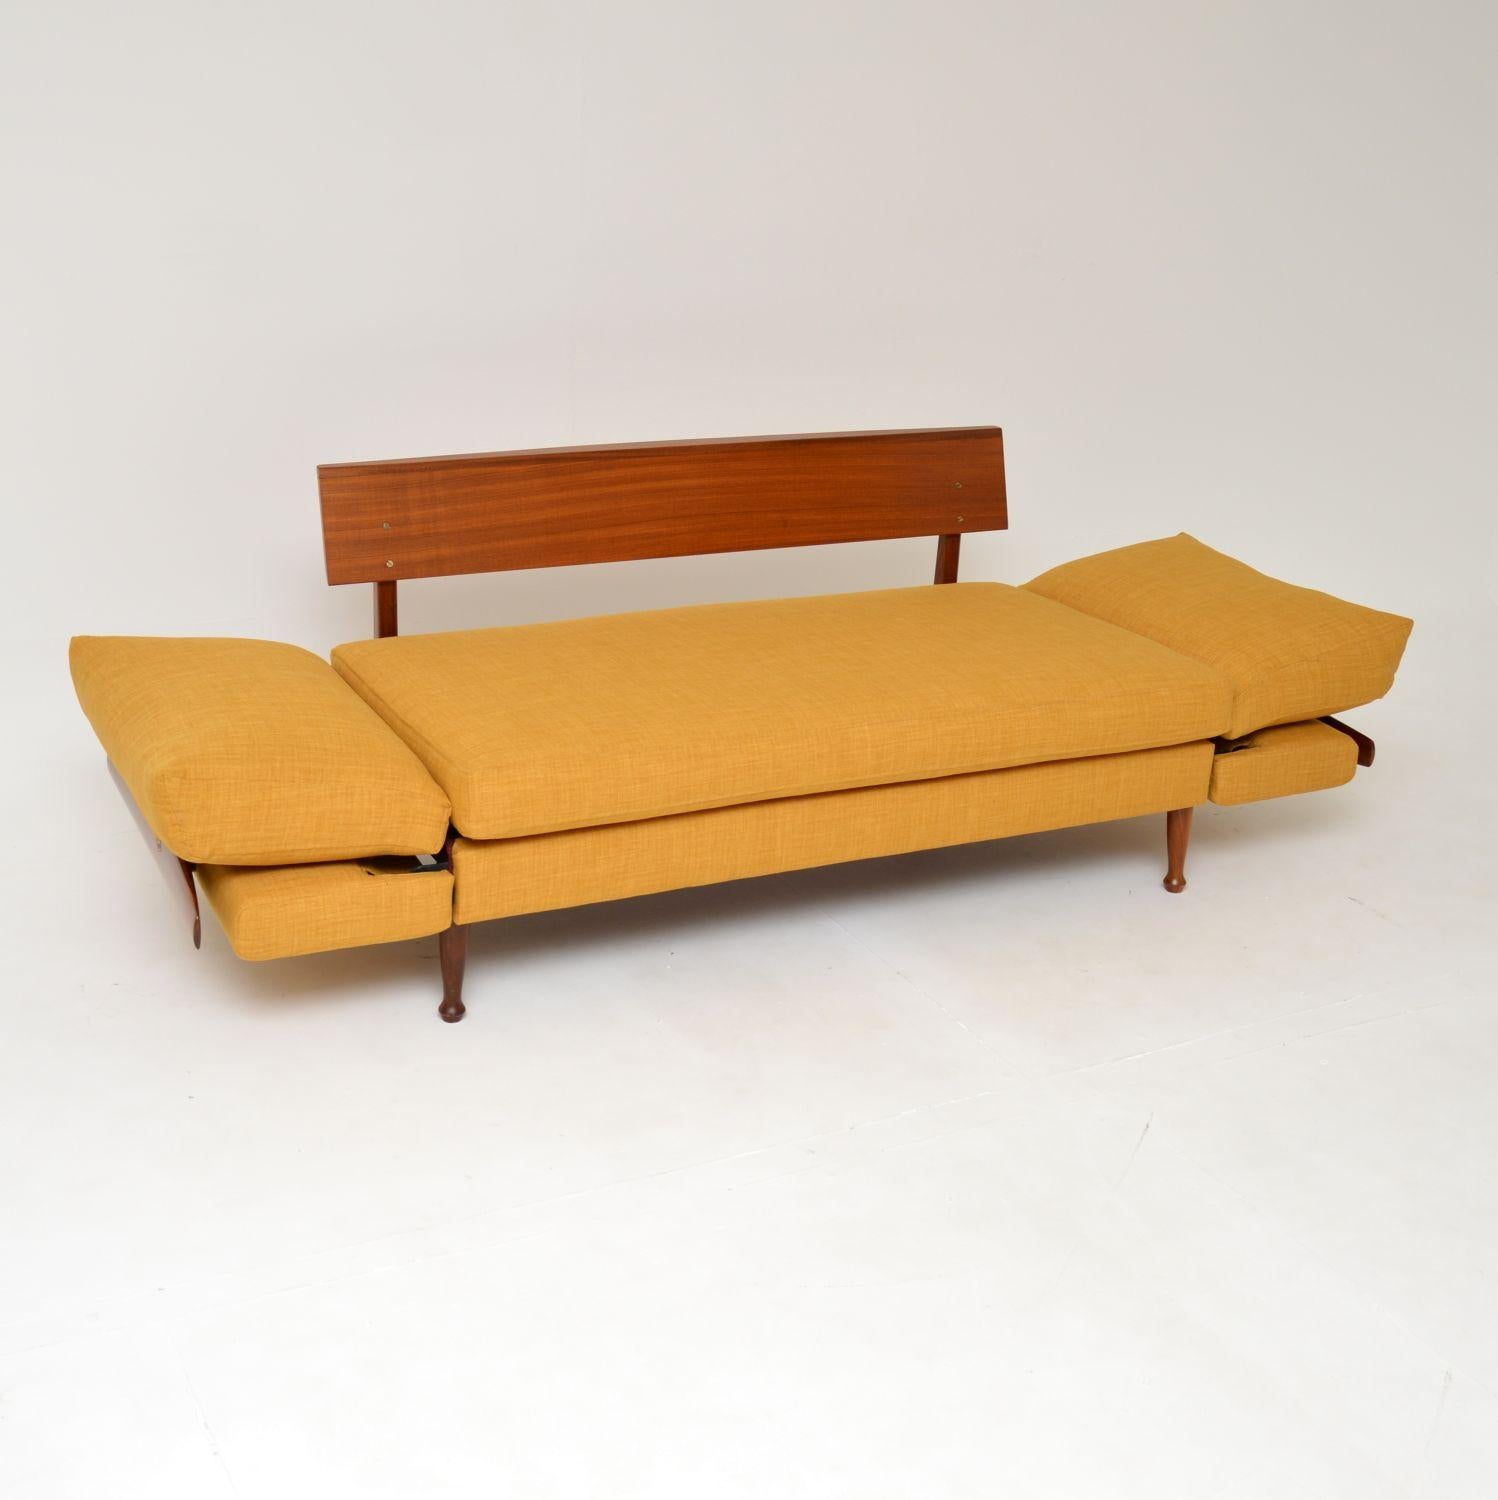 A superb vintage sofa bed in afromosia wood. This was made by Greaves & Thomas in England, it dates from the 1960’s.

The quality is fantastic, this is a very useful and compact size. The armrests drop down on either side and the back cushions go